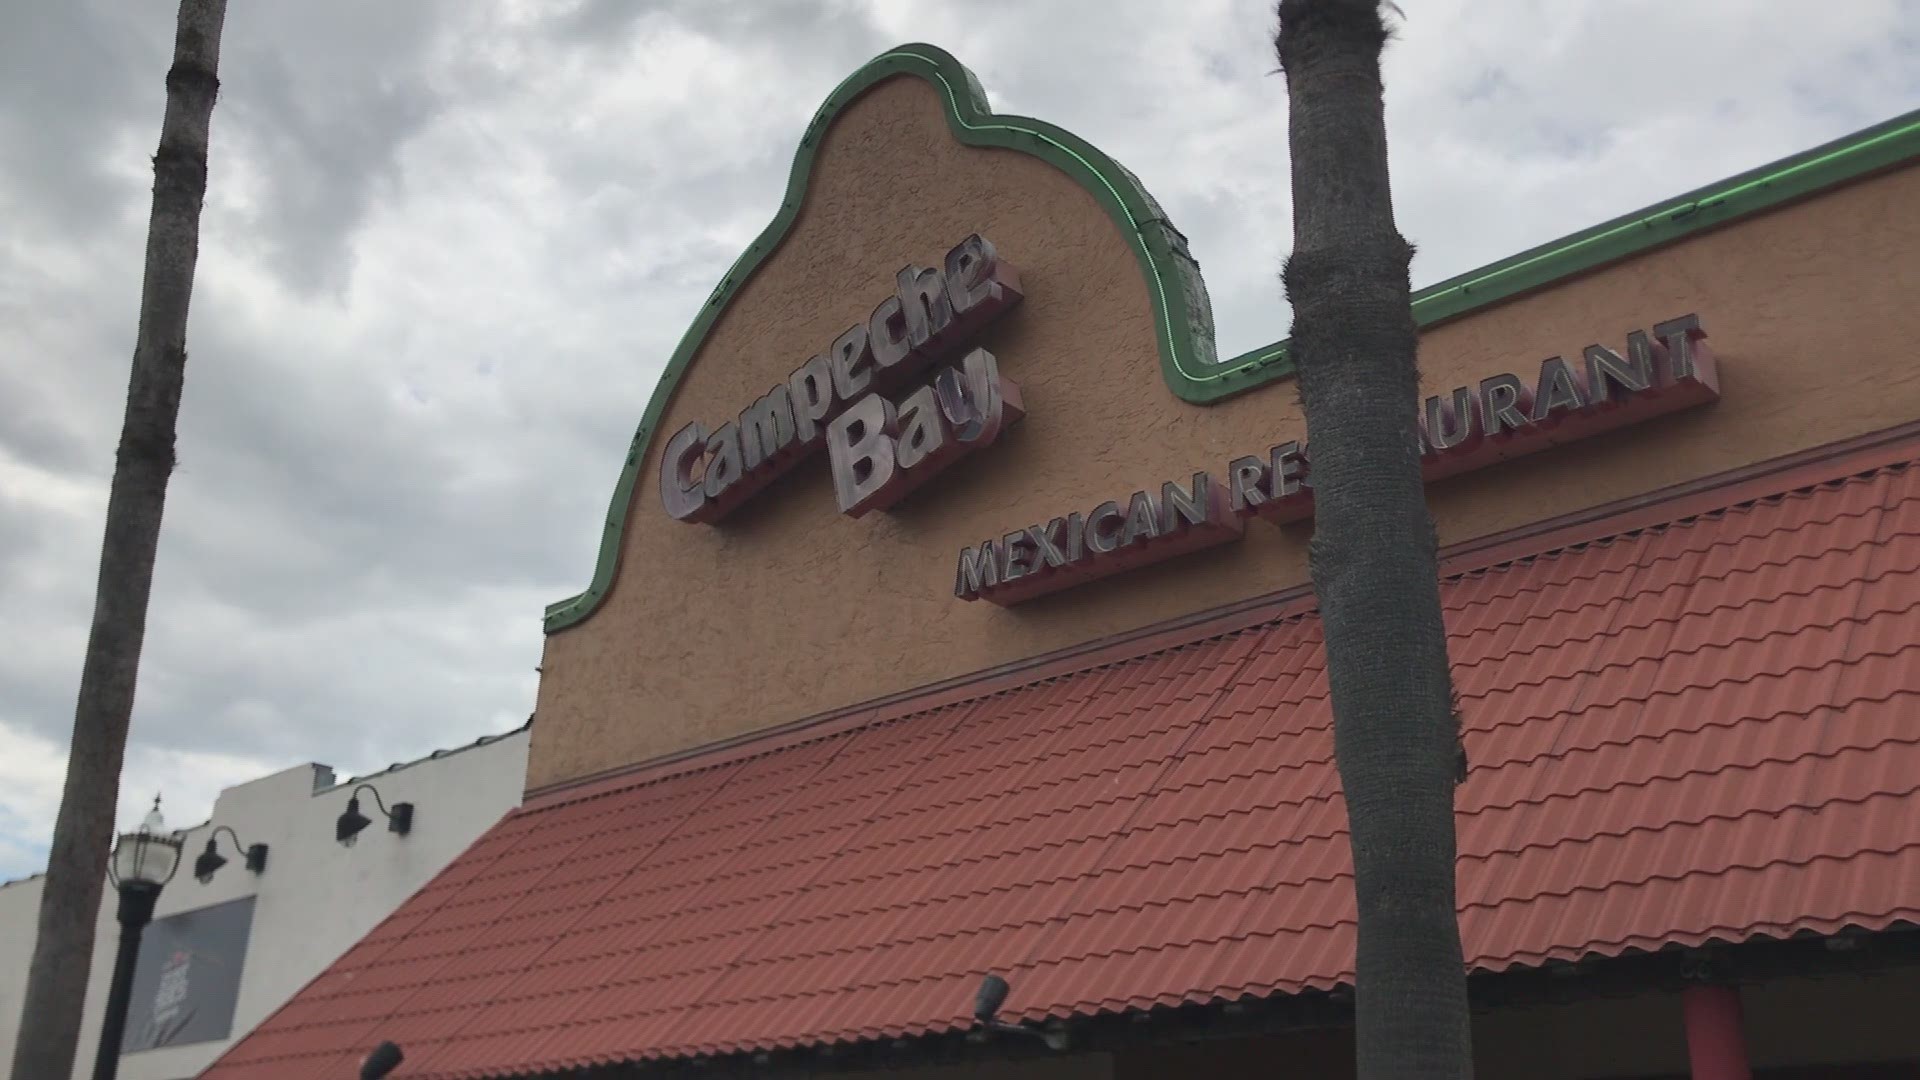 Campeche Bay Cantina is closing Wednesday, Aug. 7, after 33 years of satisfying the appetites of Mexican food lovers at Jacksonville Beach and beyond.